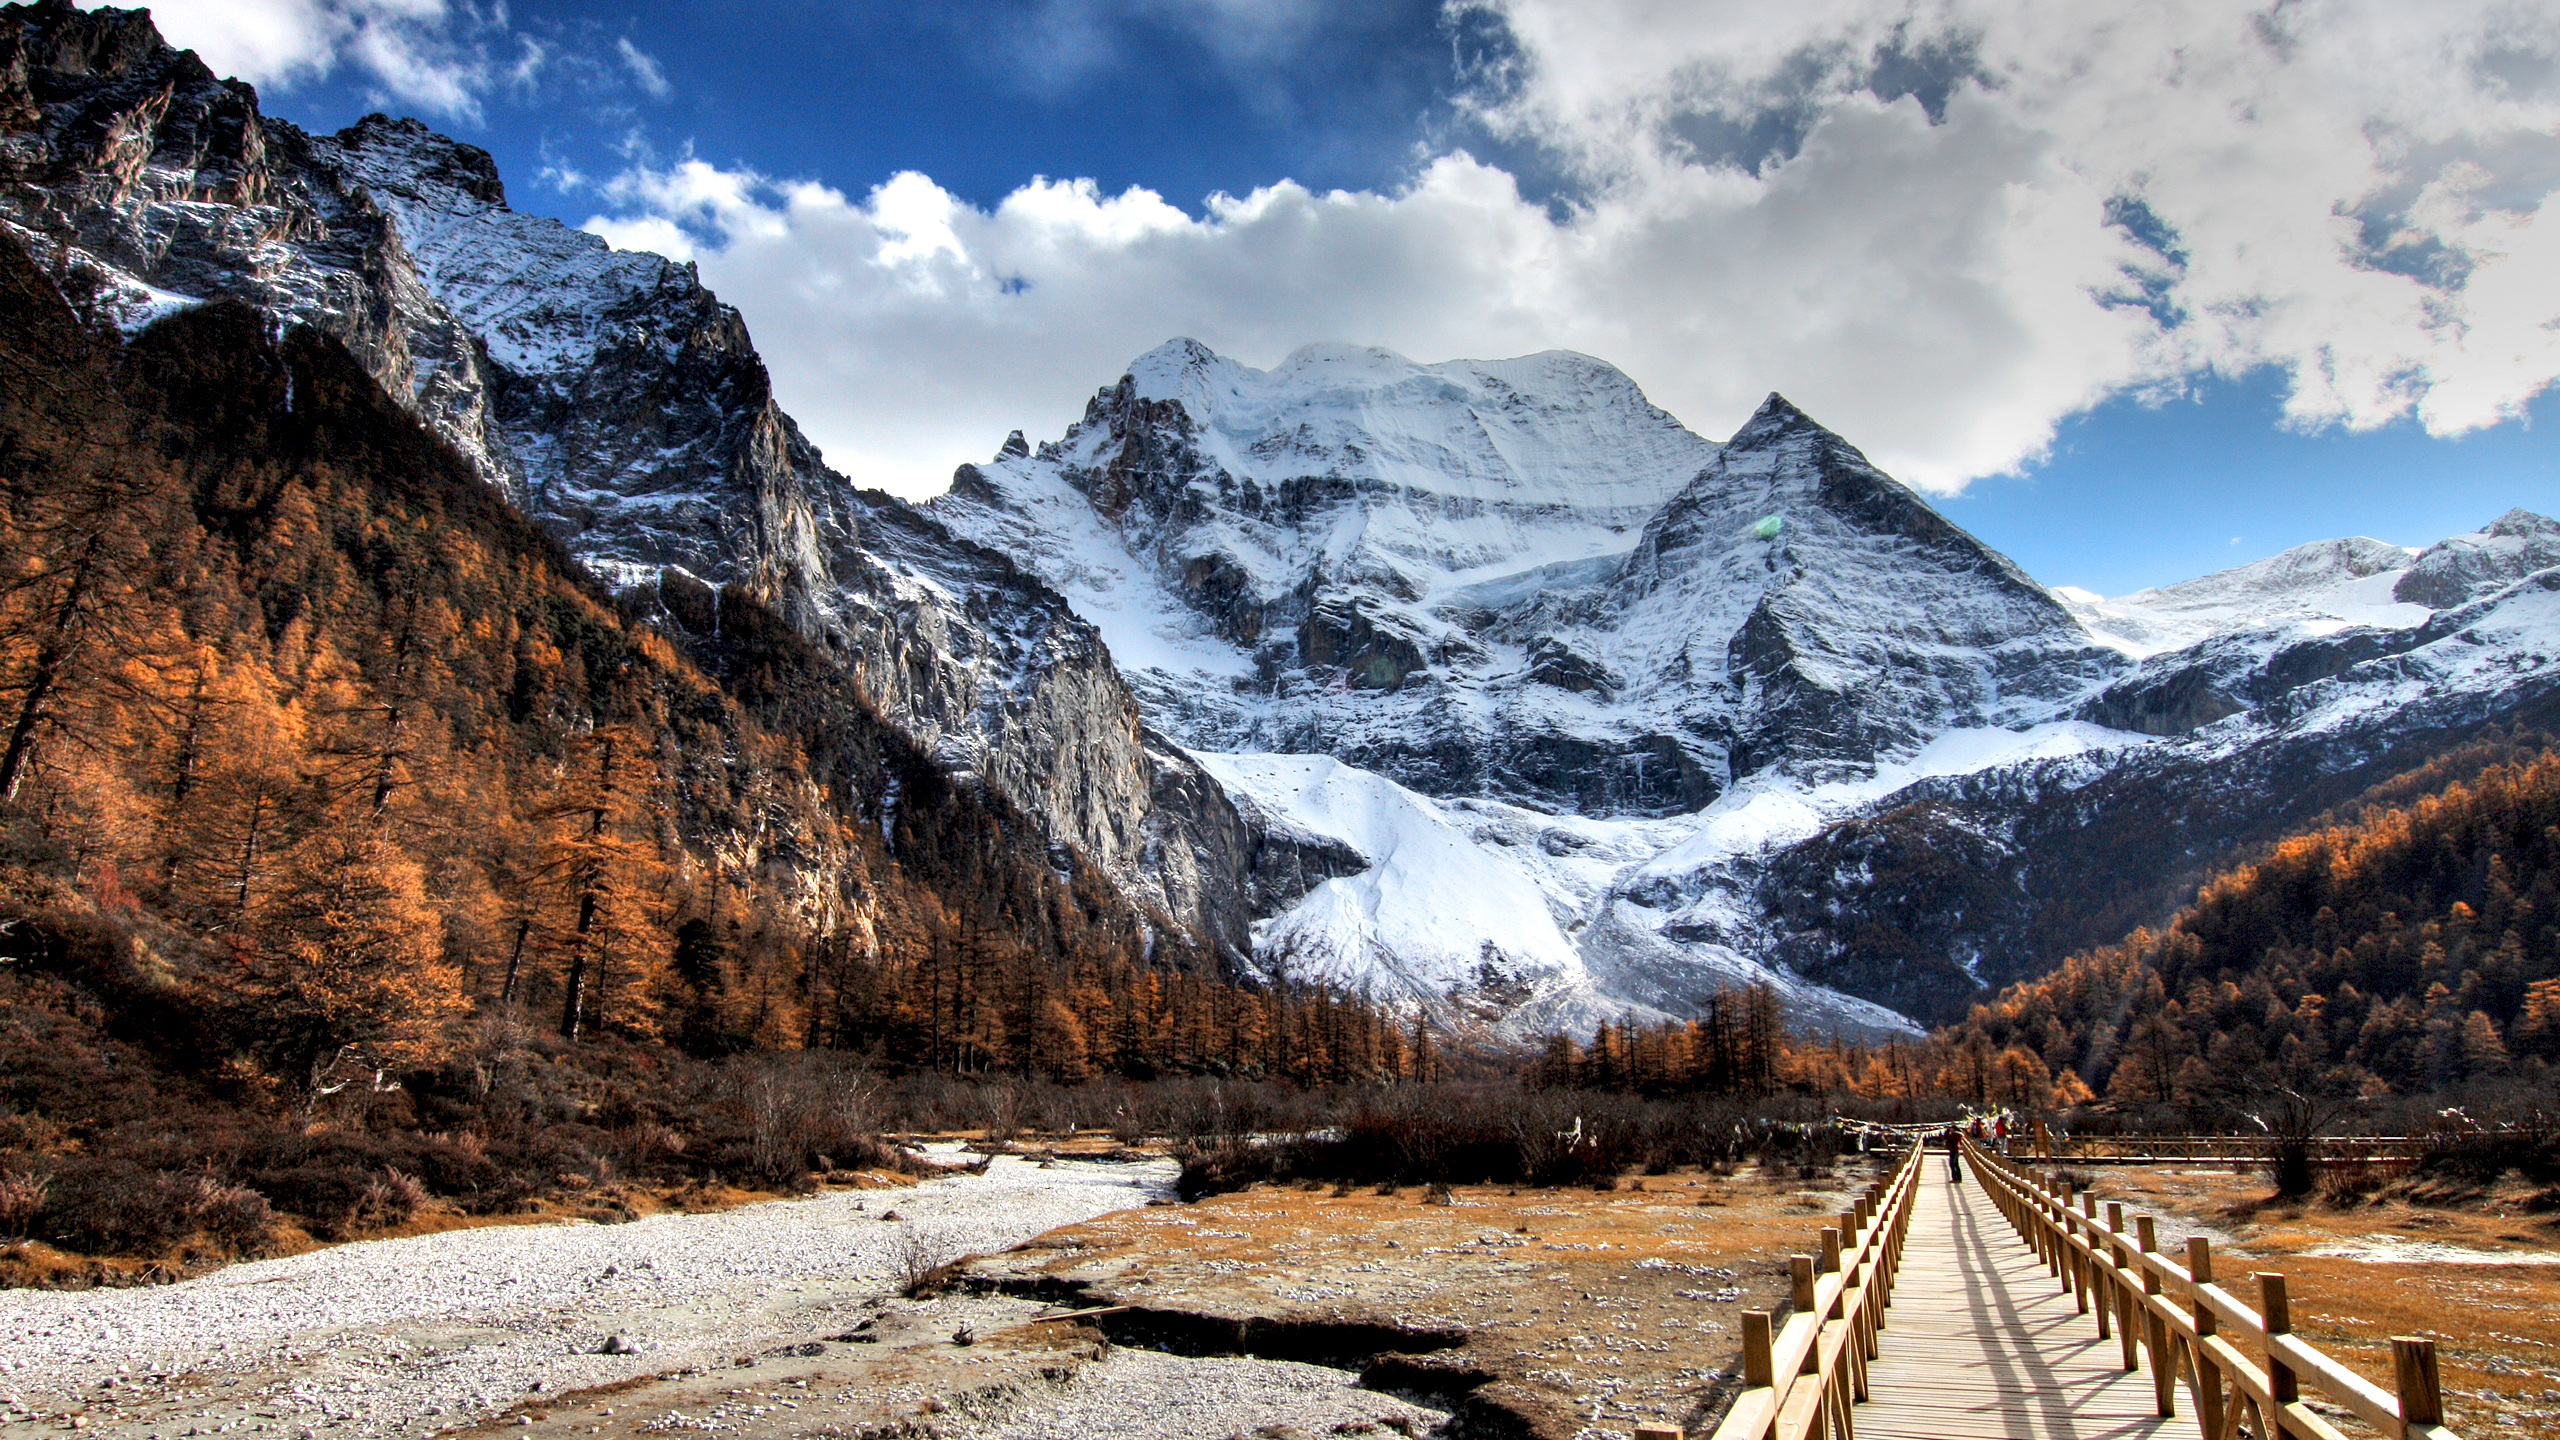 General 2560x1440 nature mountains clouds landscape snowy mountain Asia China snowy peak outdoors